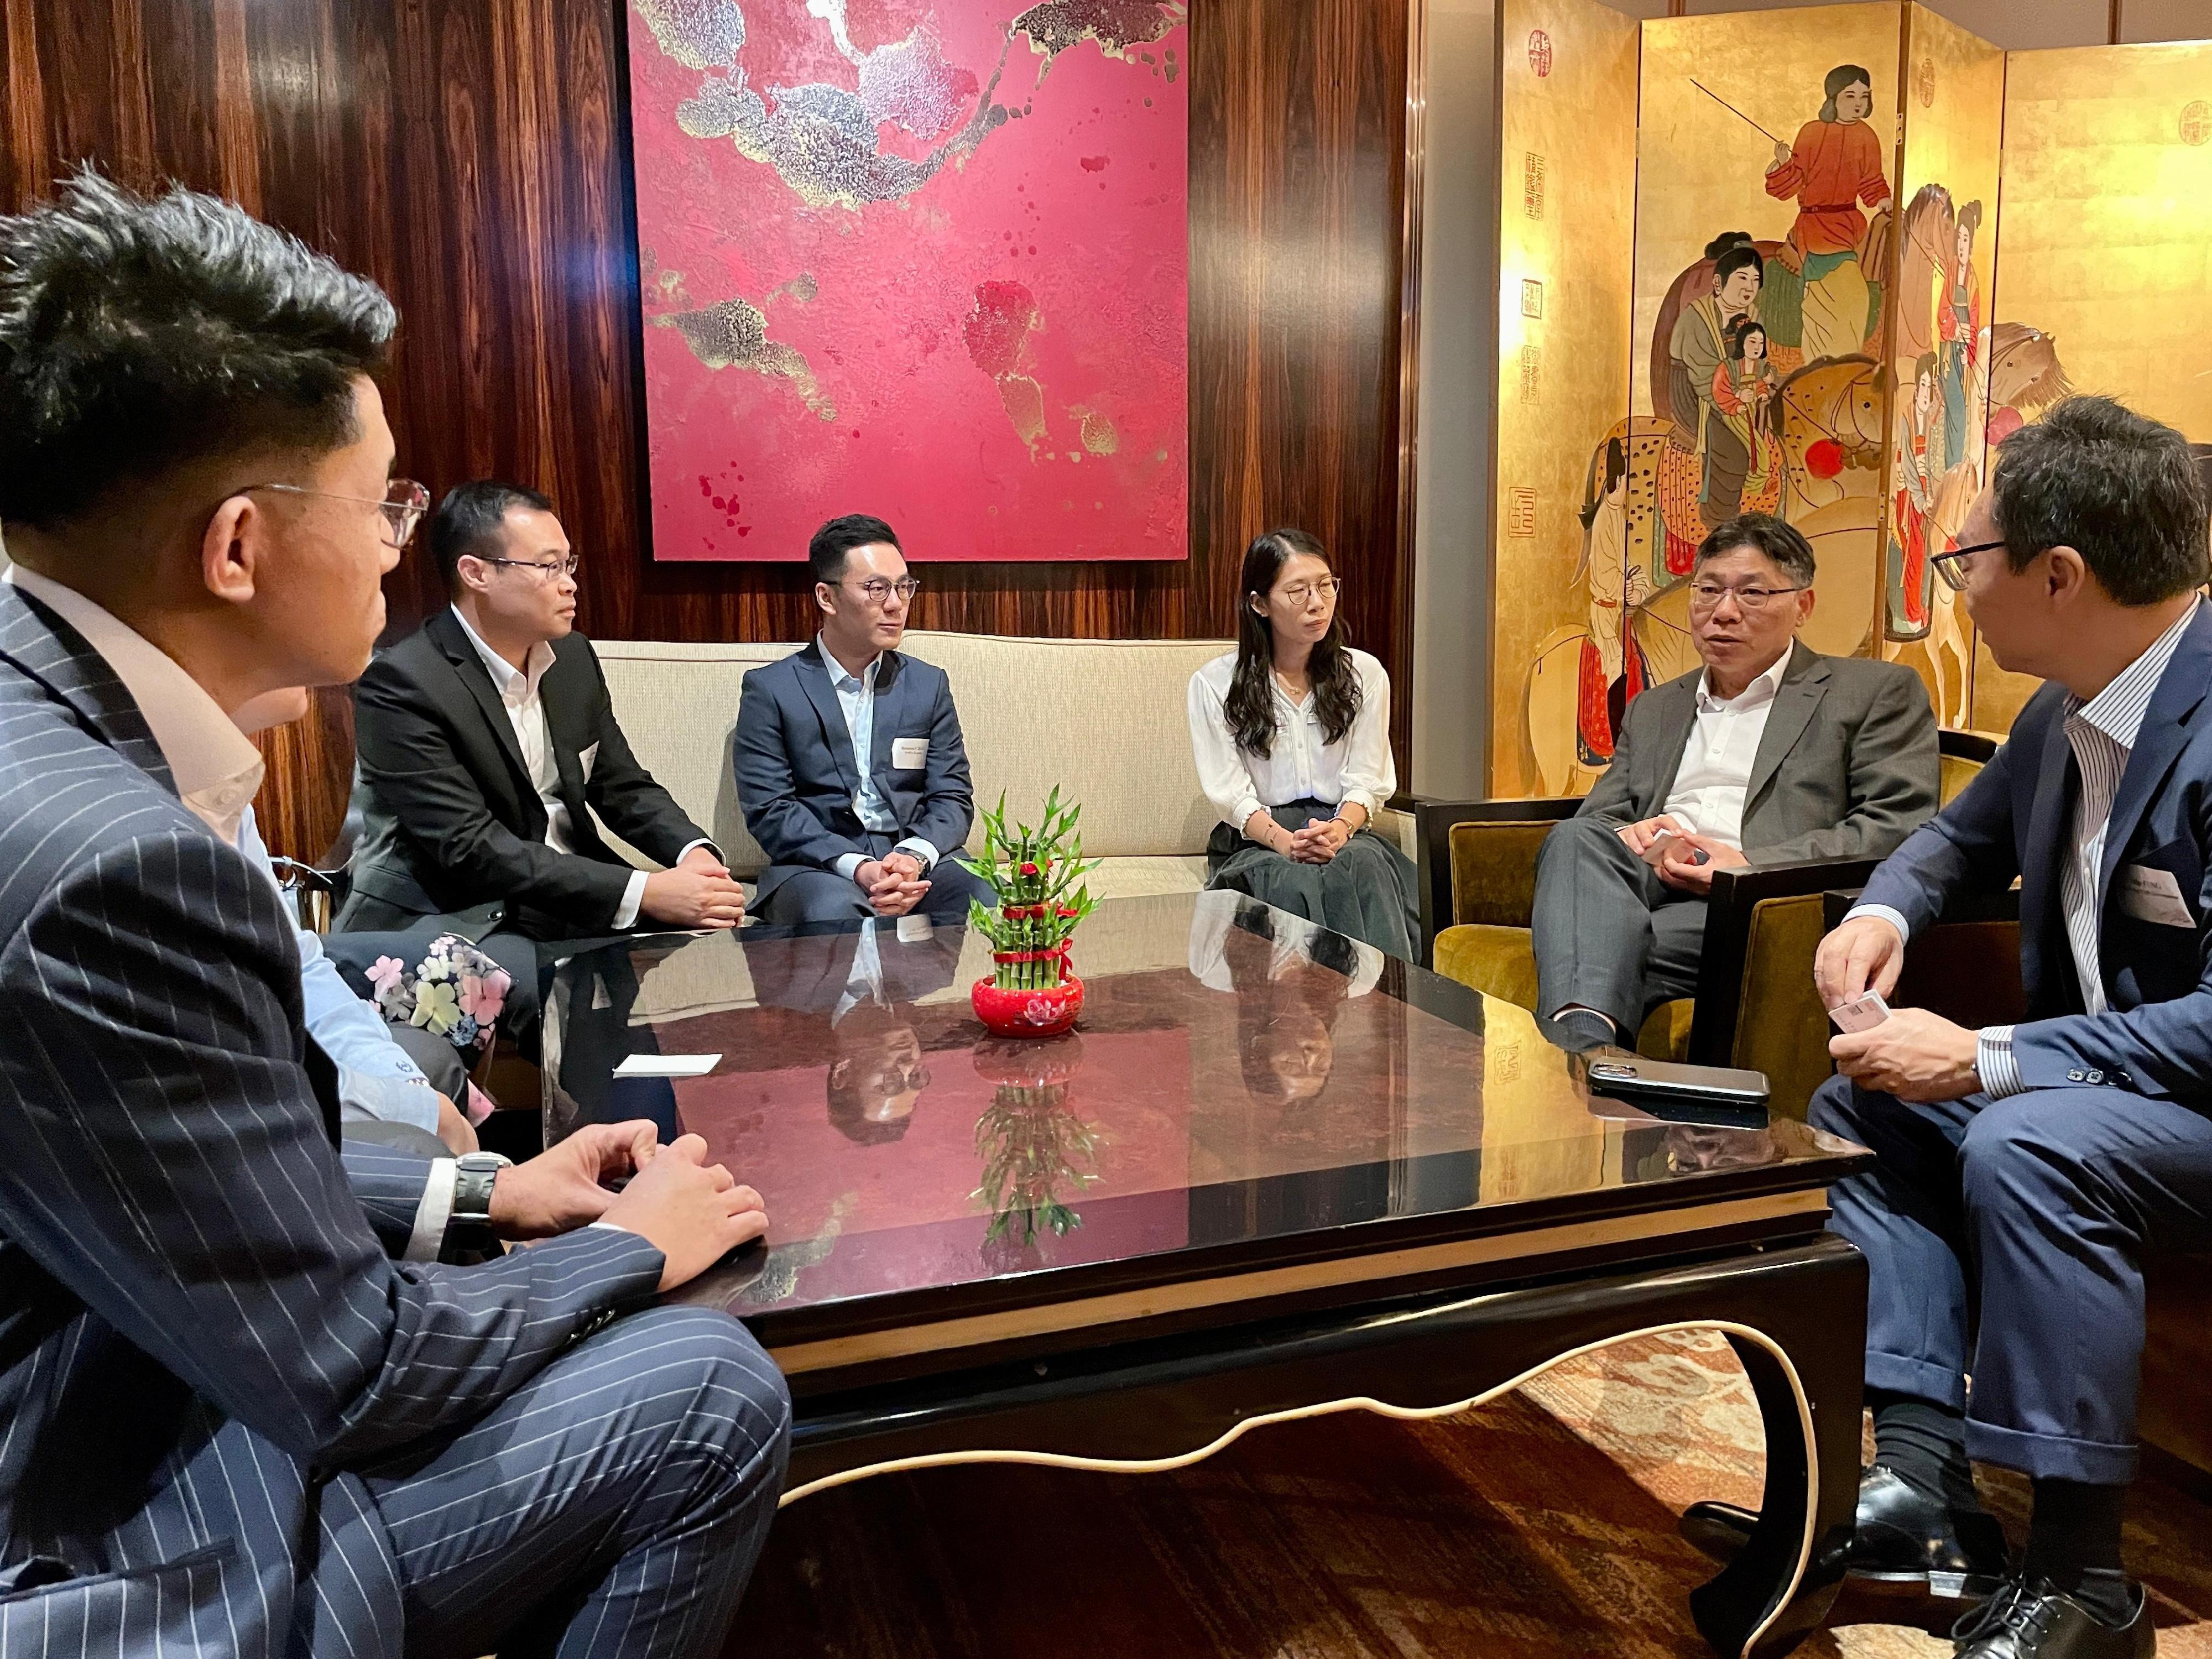 The Secretary for Transport and Logistics, Mr Lam Sai-hung (second right), continued his visit to Singapore today (January 31) and met with Hong Kong people living in Singapore in the evening to learn about their daily lives.